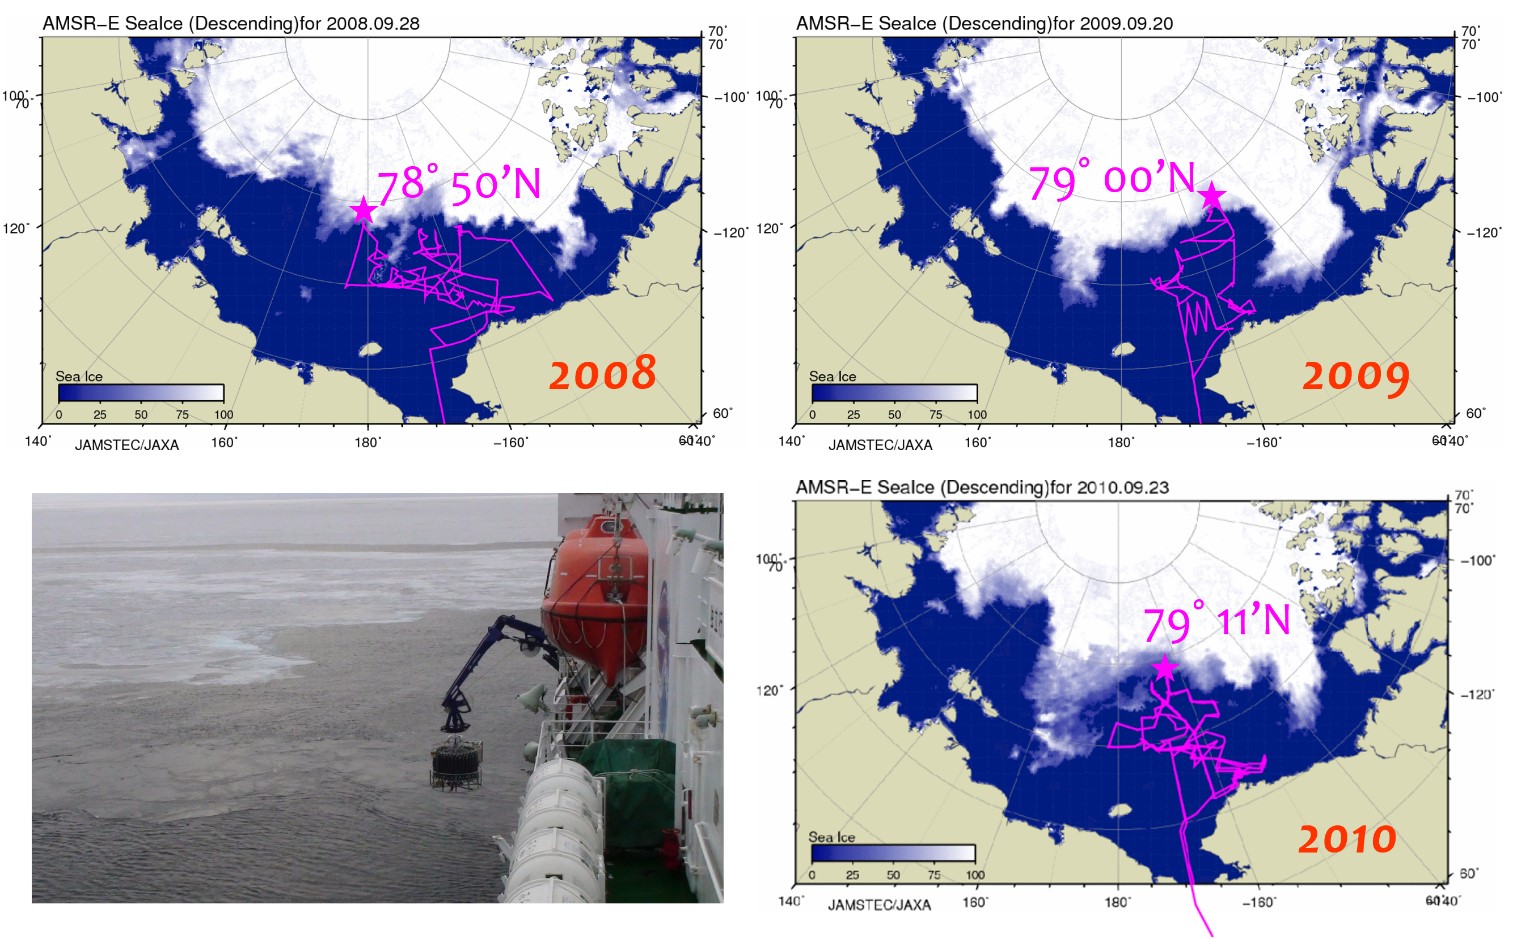 Figure 8. Trajectories and sea ice concentration during R/V Mirai Arctic cruise in 2008, 2009, 2010.  Note that the lower left photo was taken at the most northern location (79.0N, 151.5W) during the cruise on September 20, 2009, which shows CTD/water sampling at the ice edge.